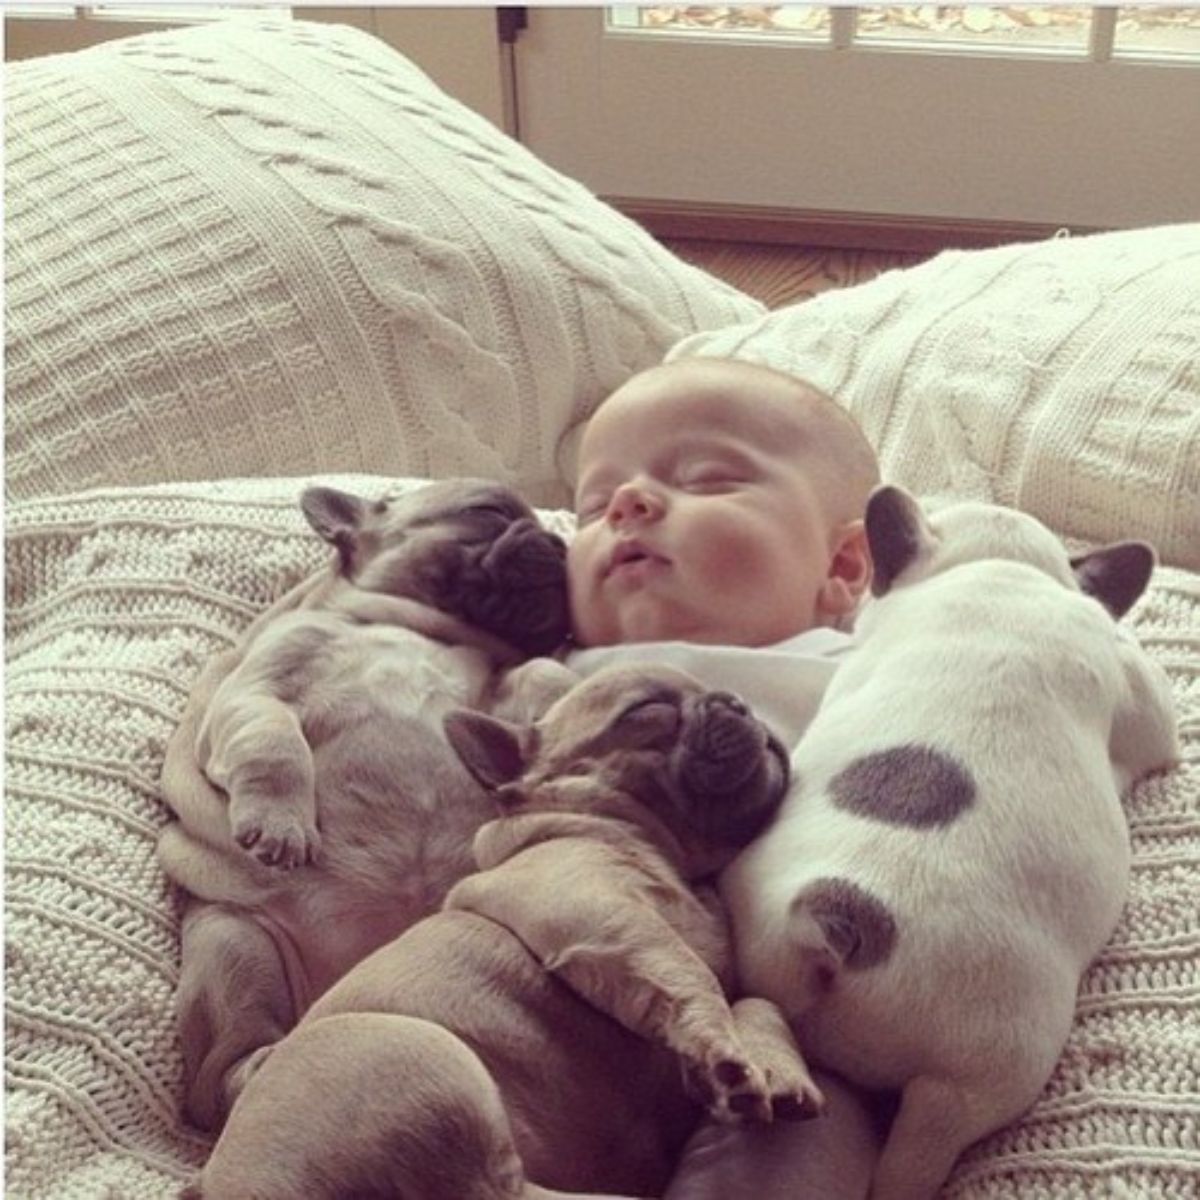 3 french bulldog puppies laying on either side and on top of a baby on a bed